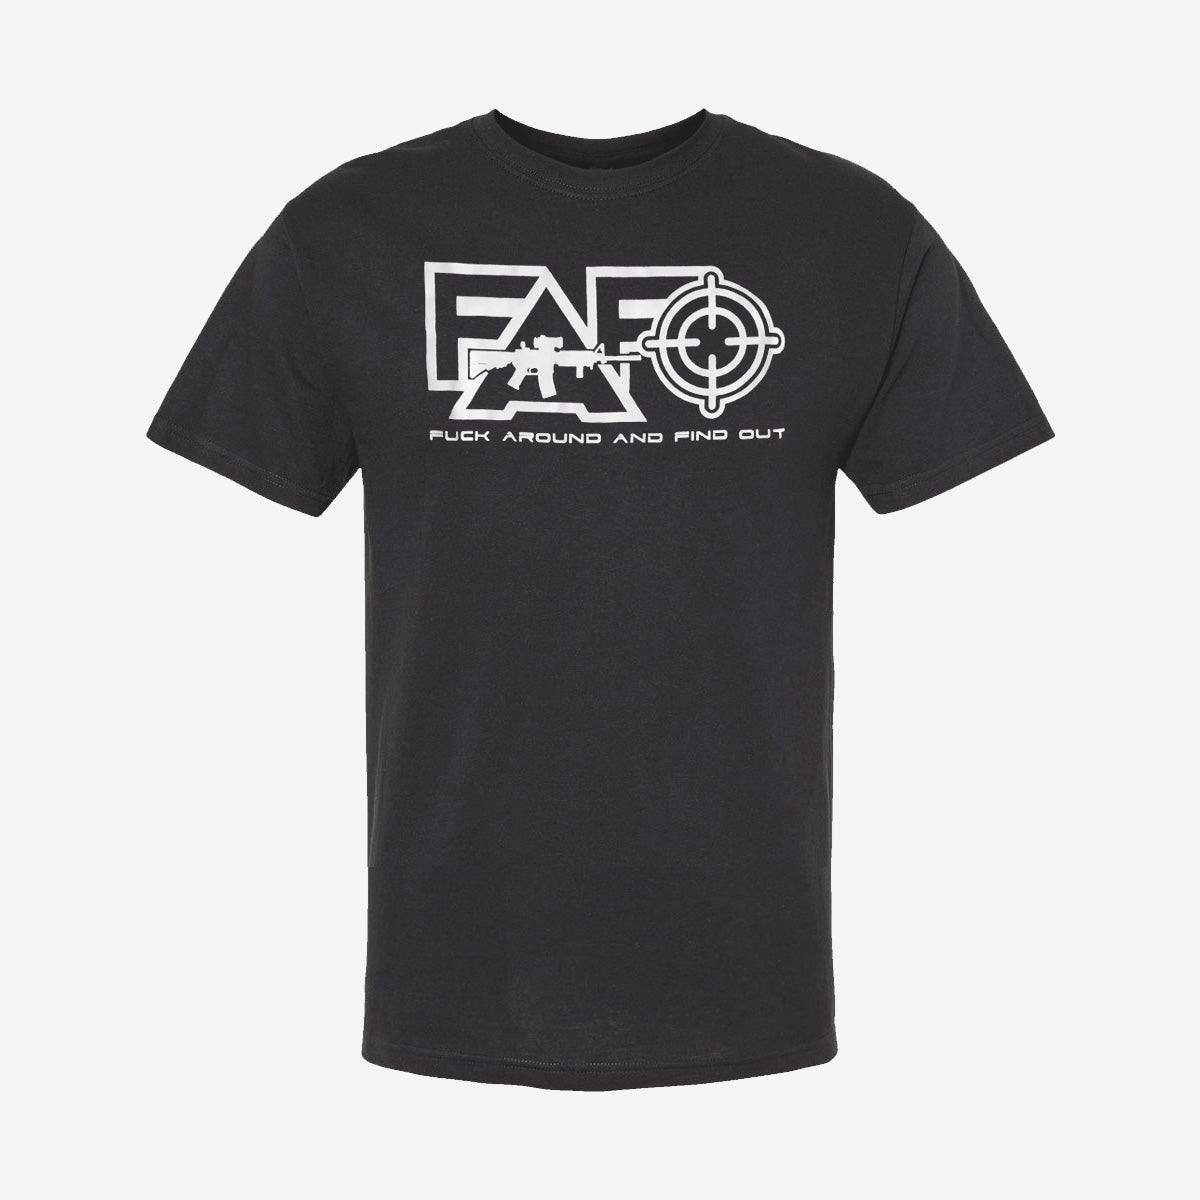 FAFO F*** Around Find Out Charcoal T-Shirt